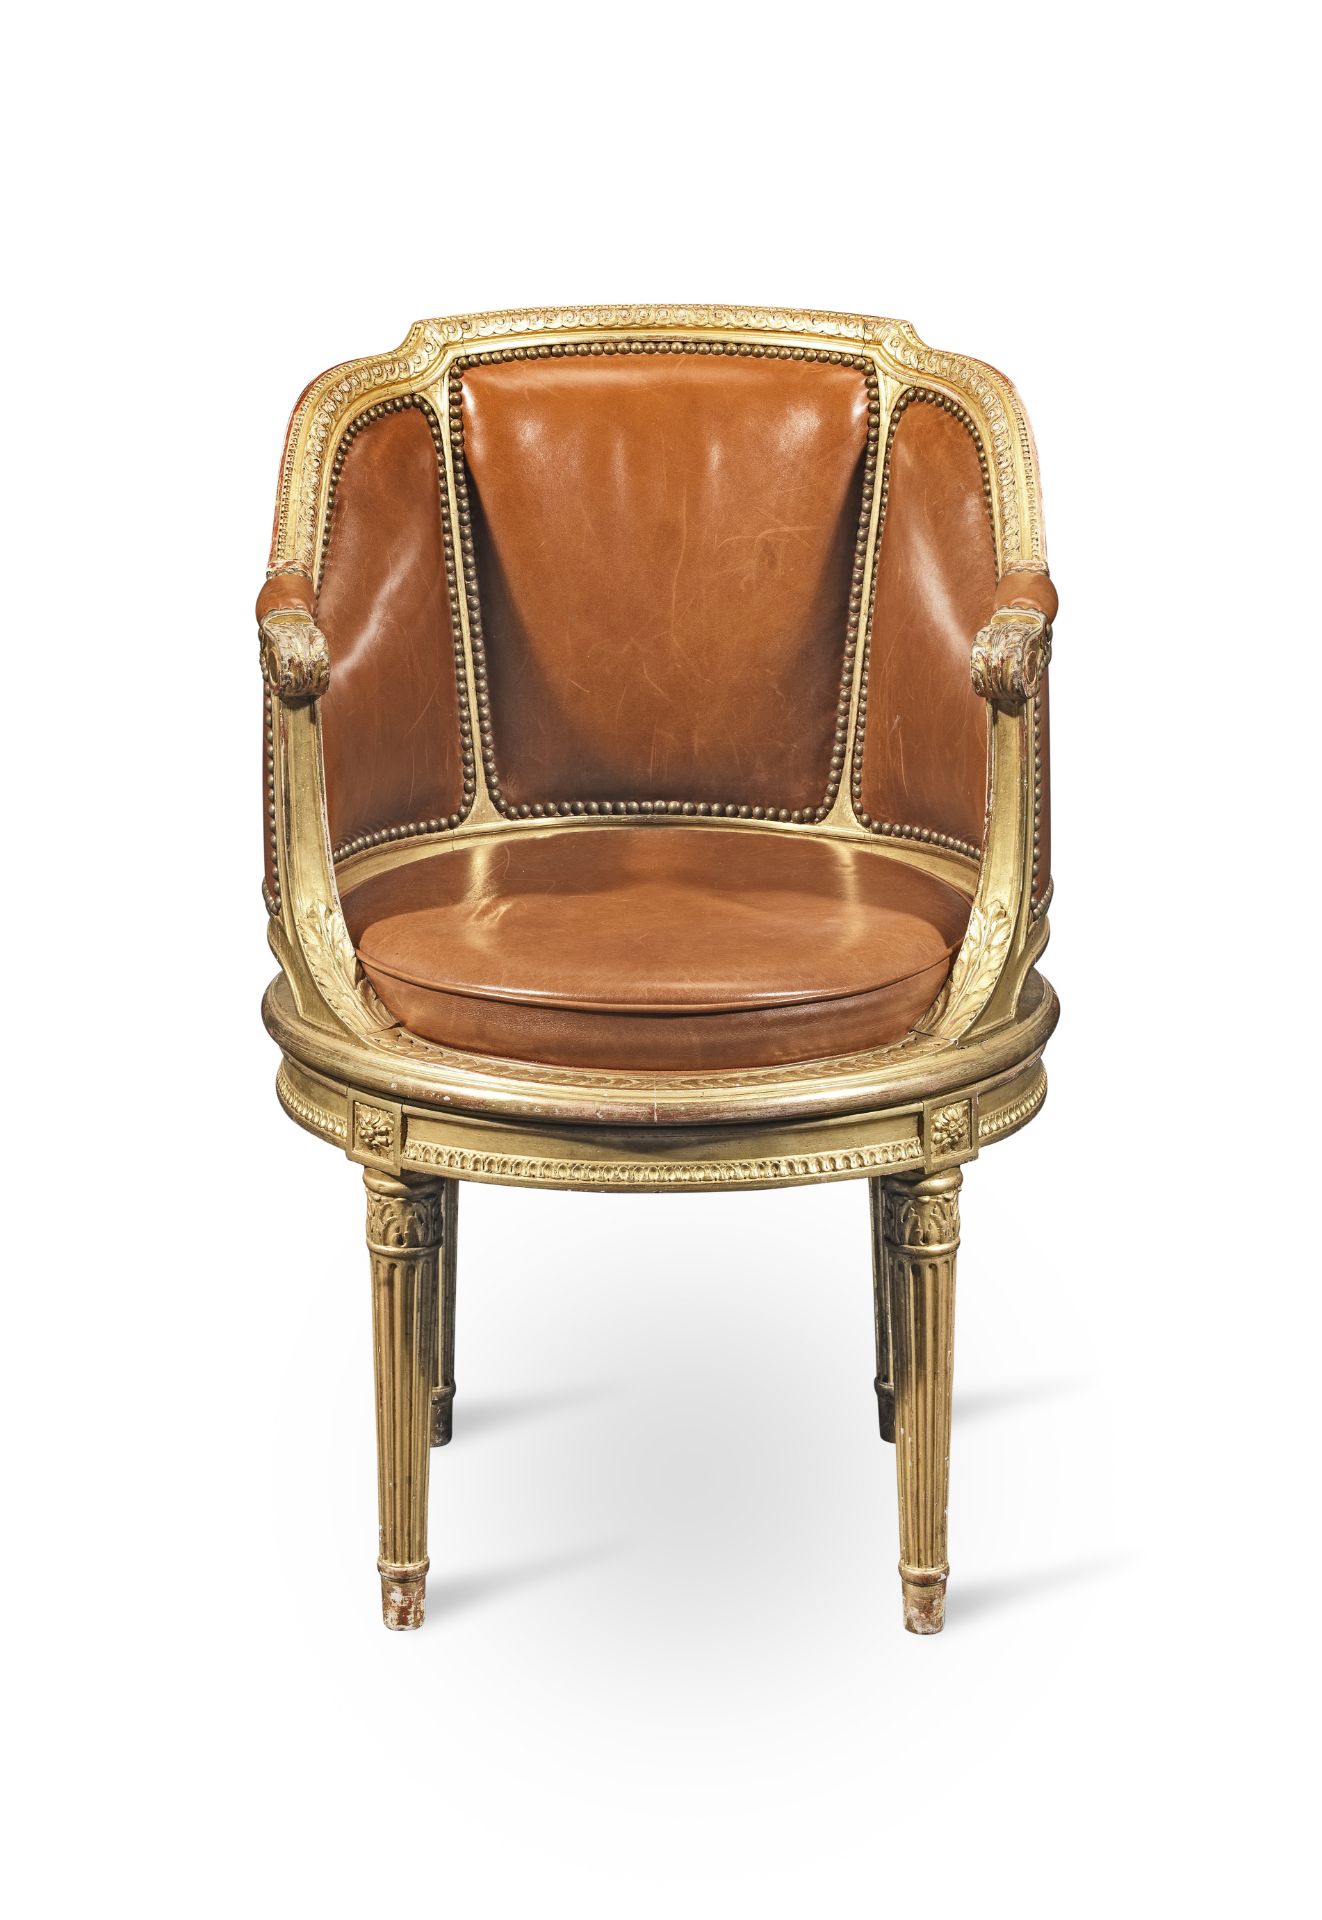 A French 19th century giltwood fauteuil de bureau in the Louis XVI style